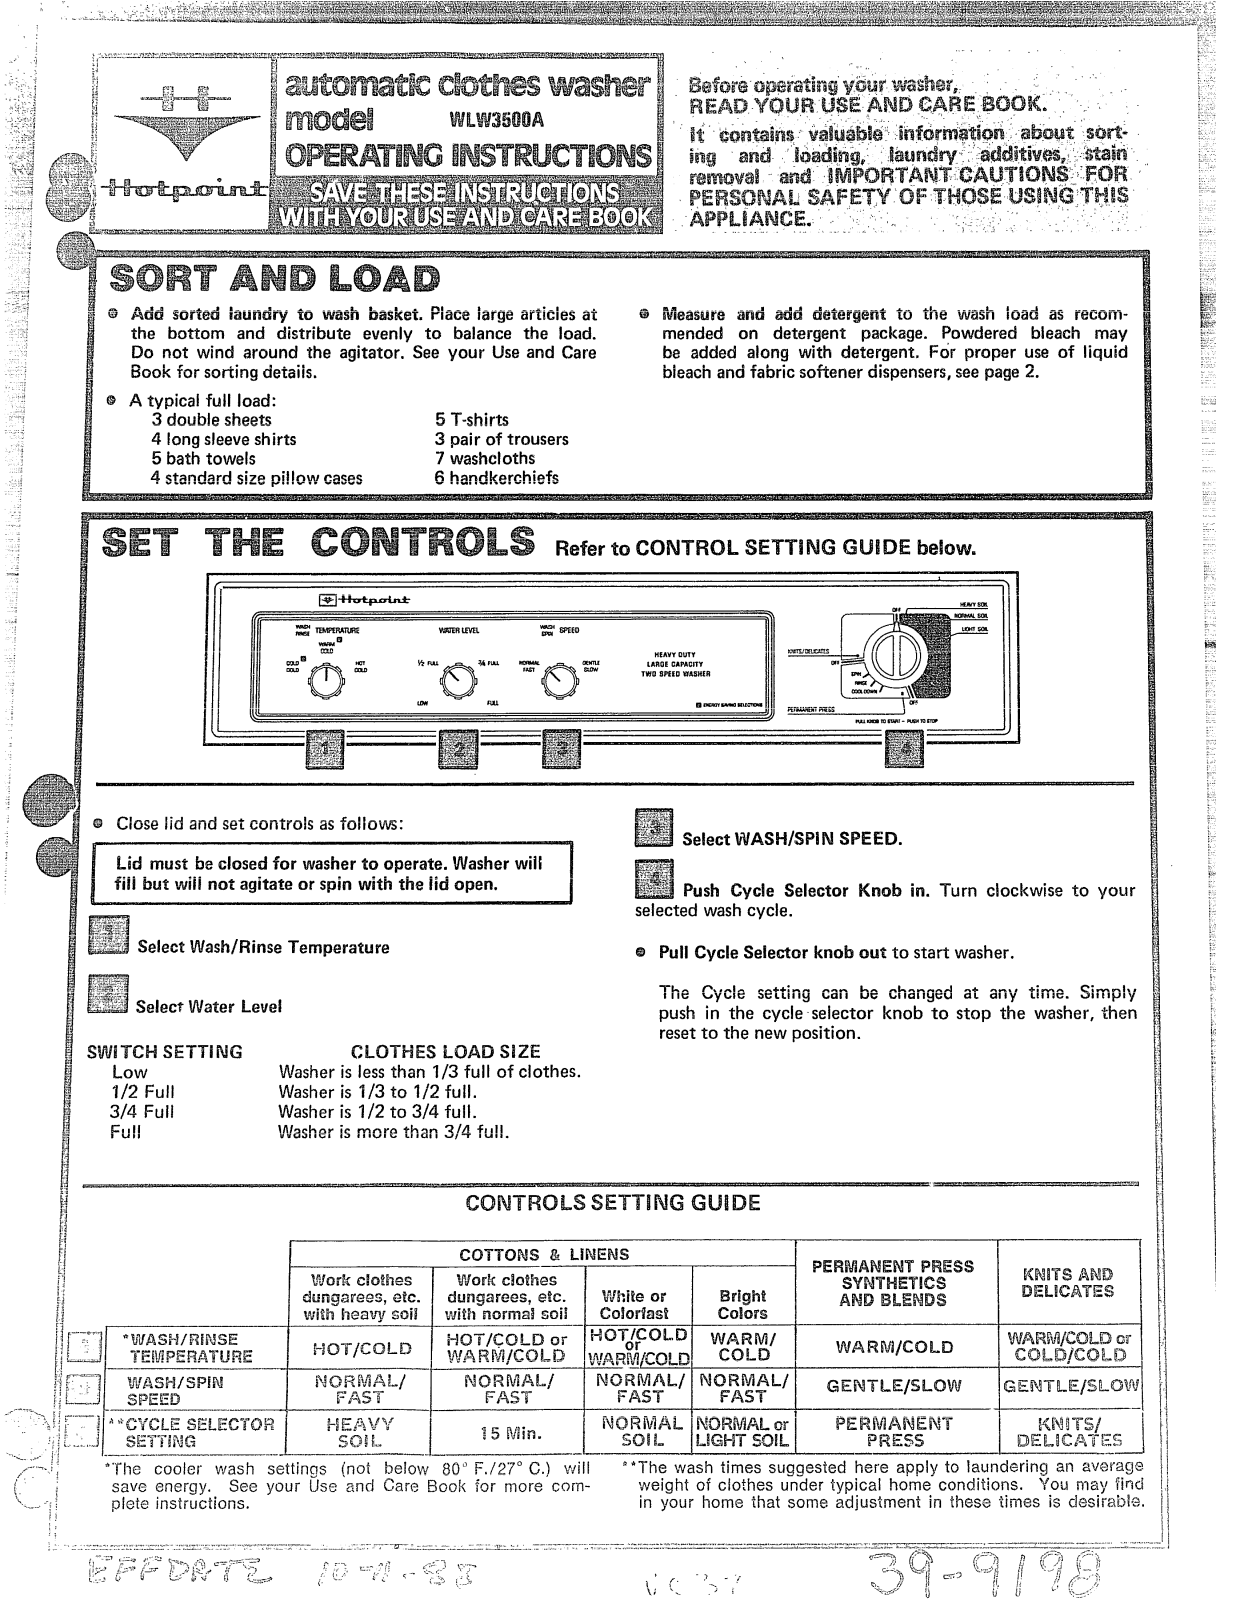 GE WLW3500A Operating Instructions